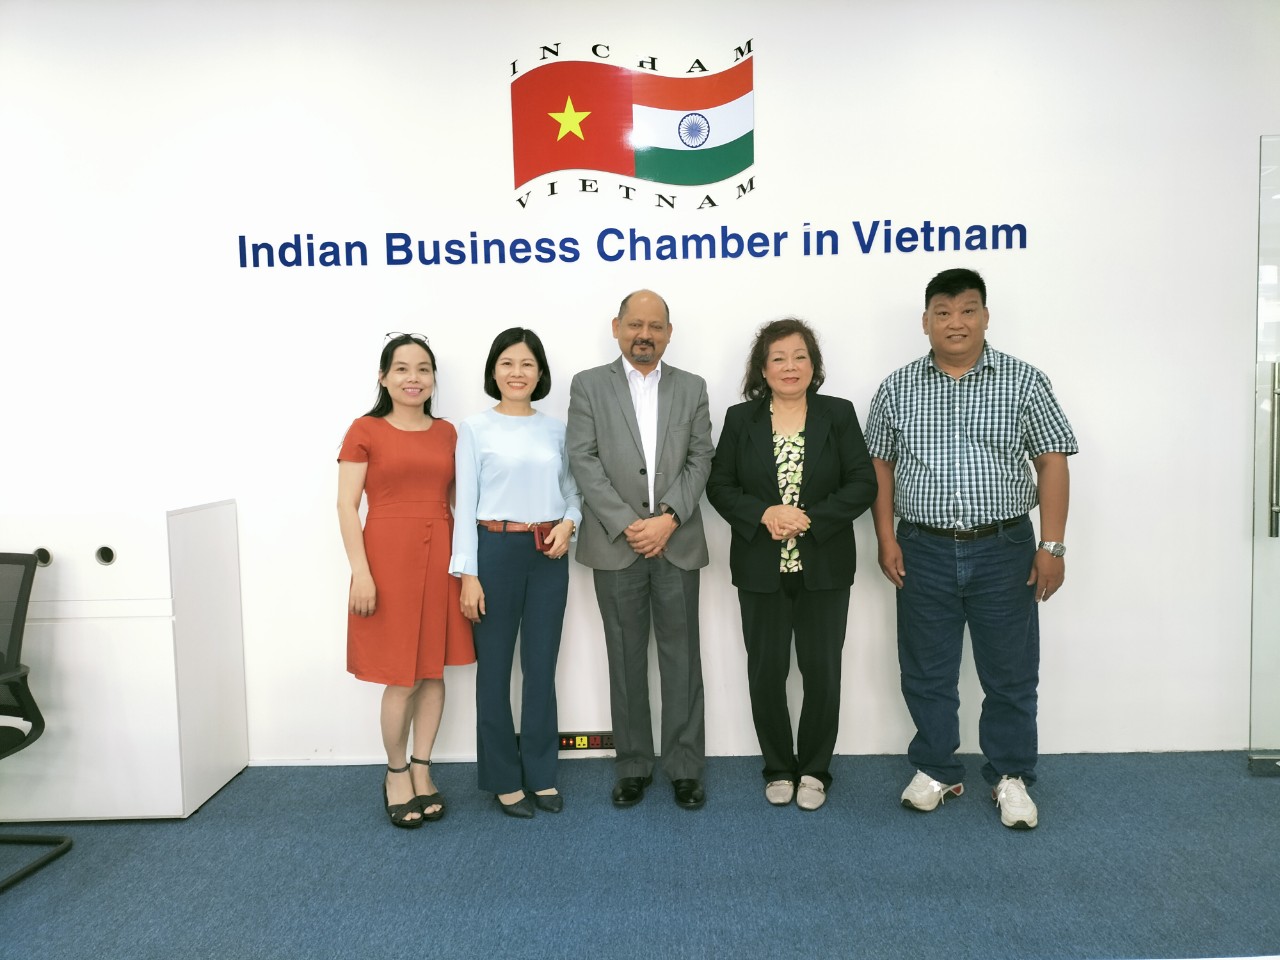 Meeting INCHAM  & SIYB, VAE at INCHAM office for trade promotion between Vietnamese and Indian businesses.